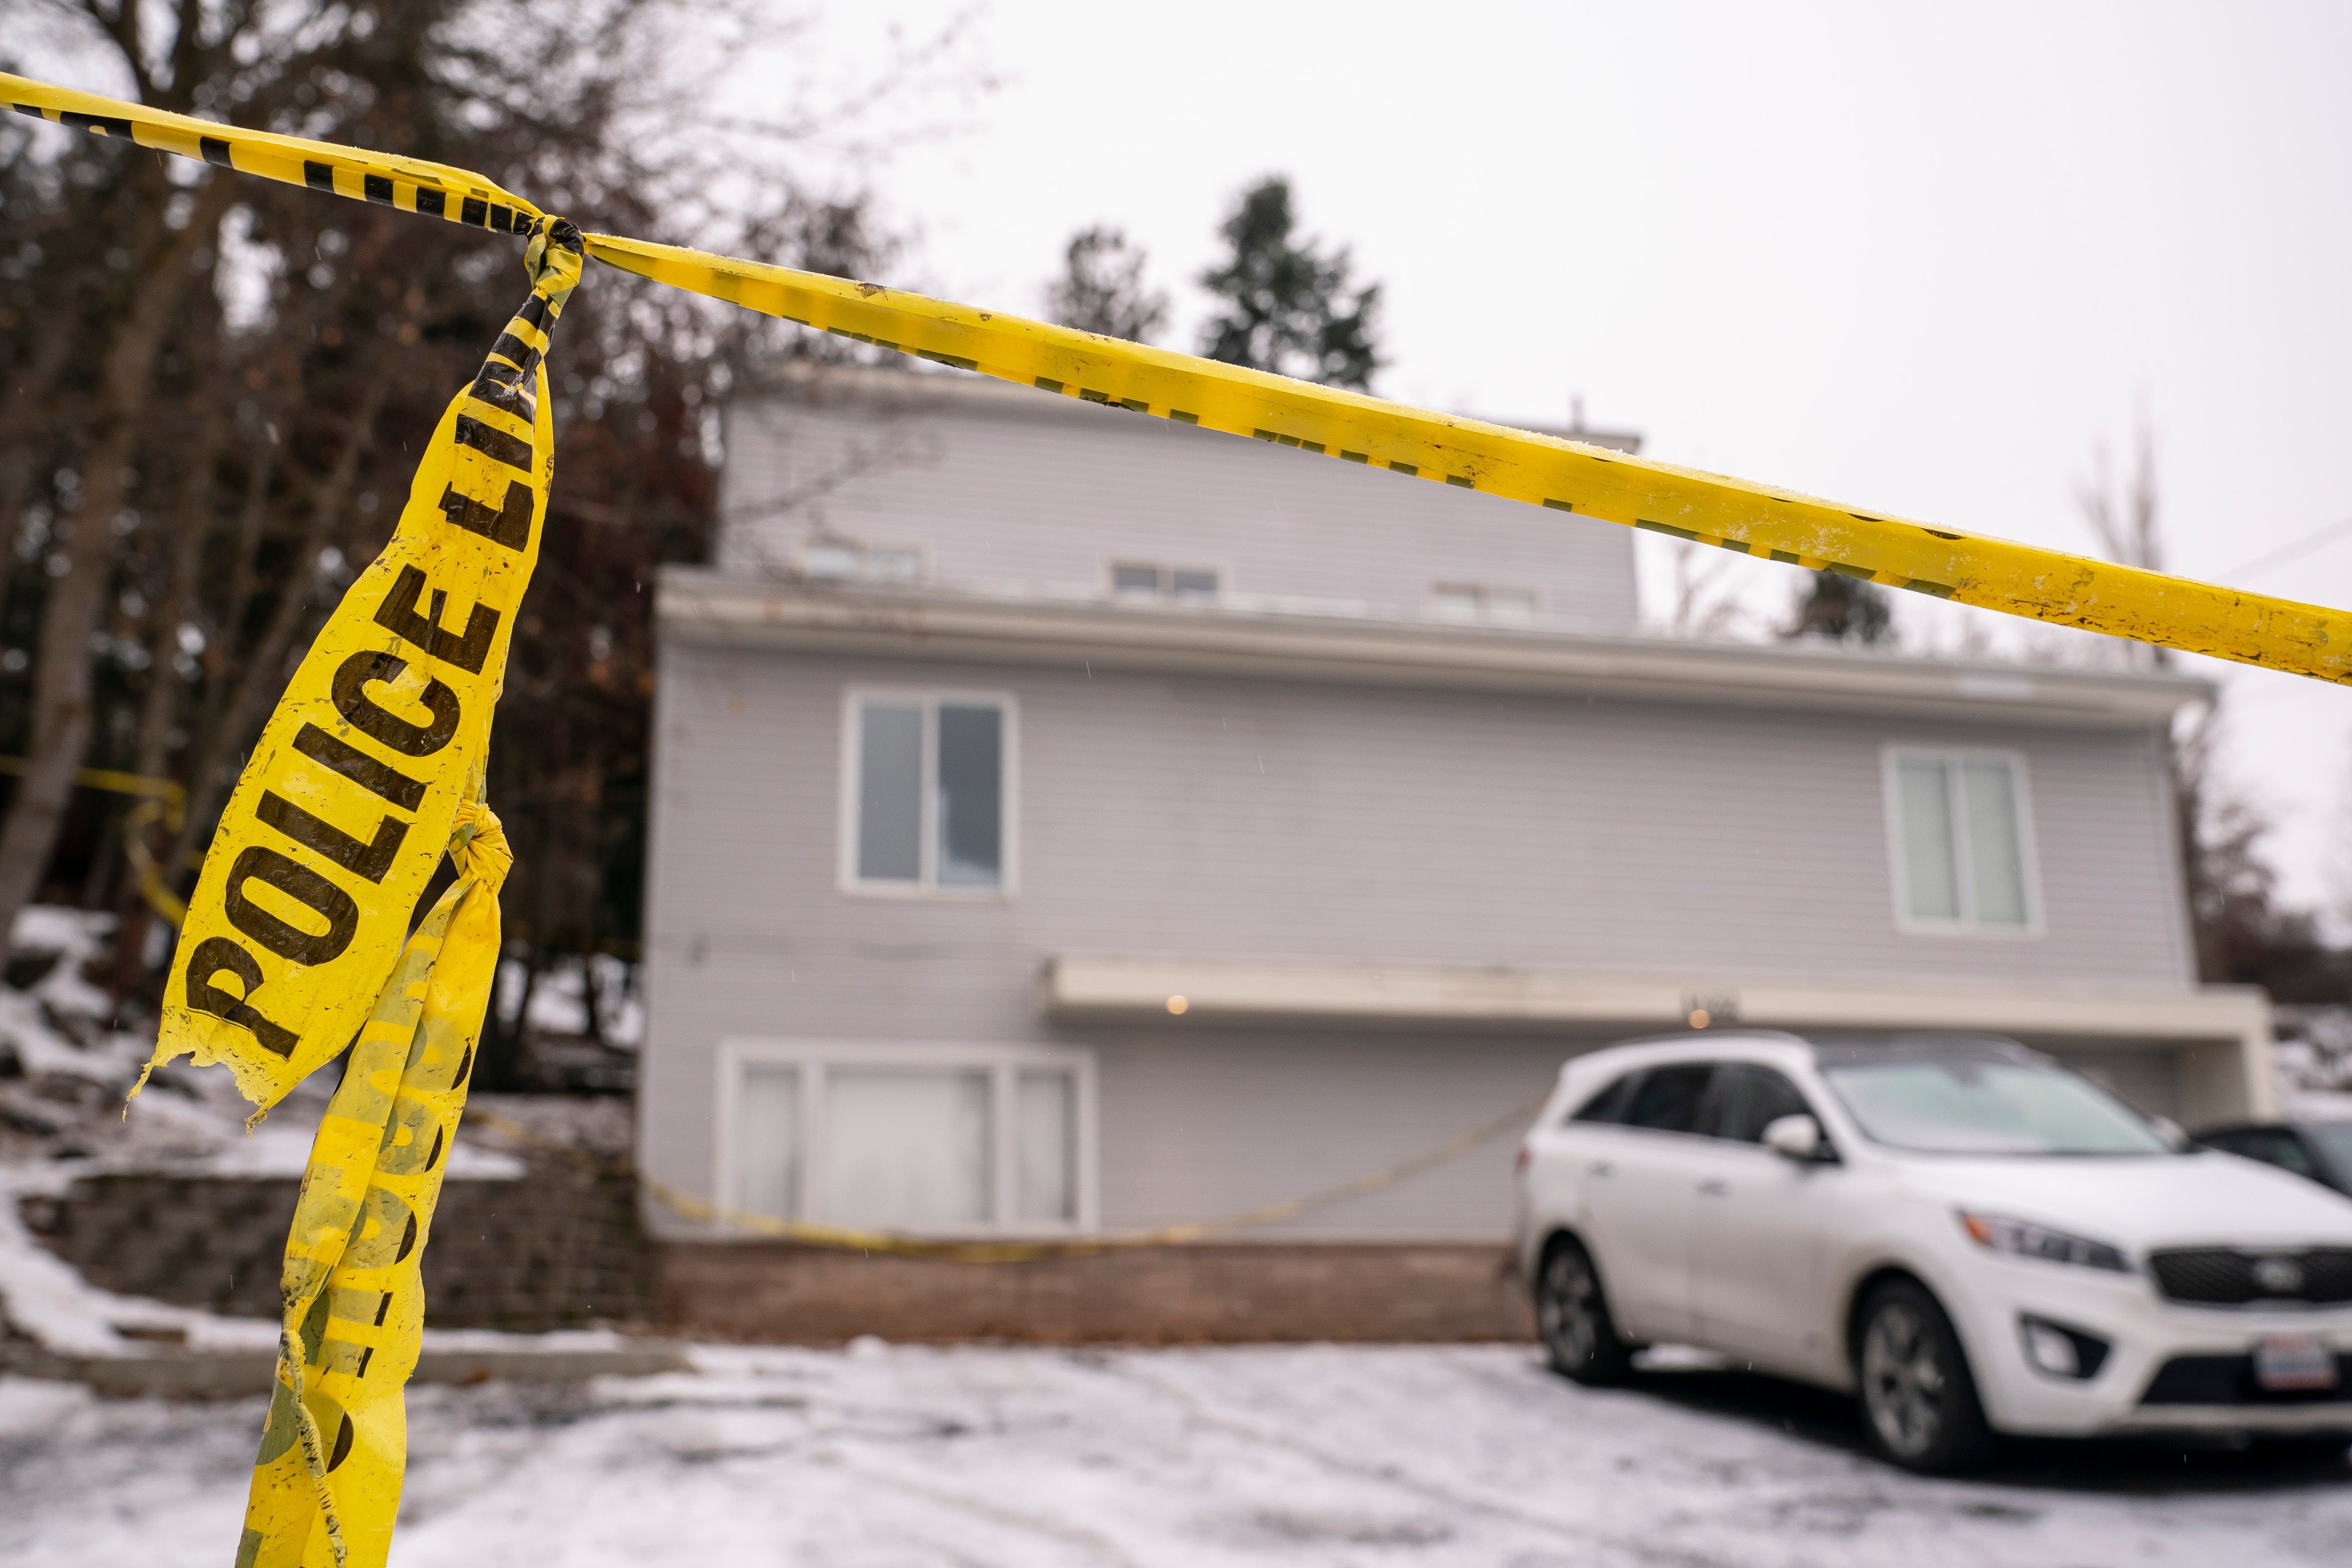 Police tape is seen at a home that is the site of a quadruple murder on 3 January 2023 in Moscow, Idaho